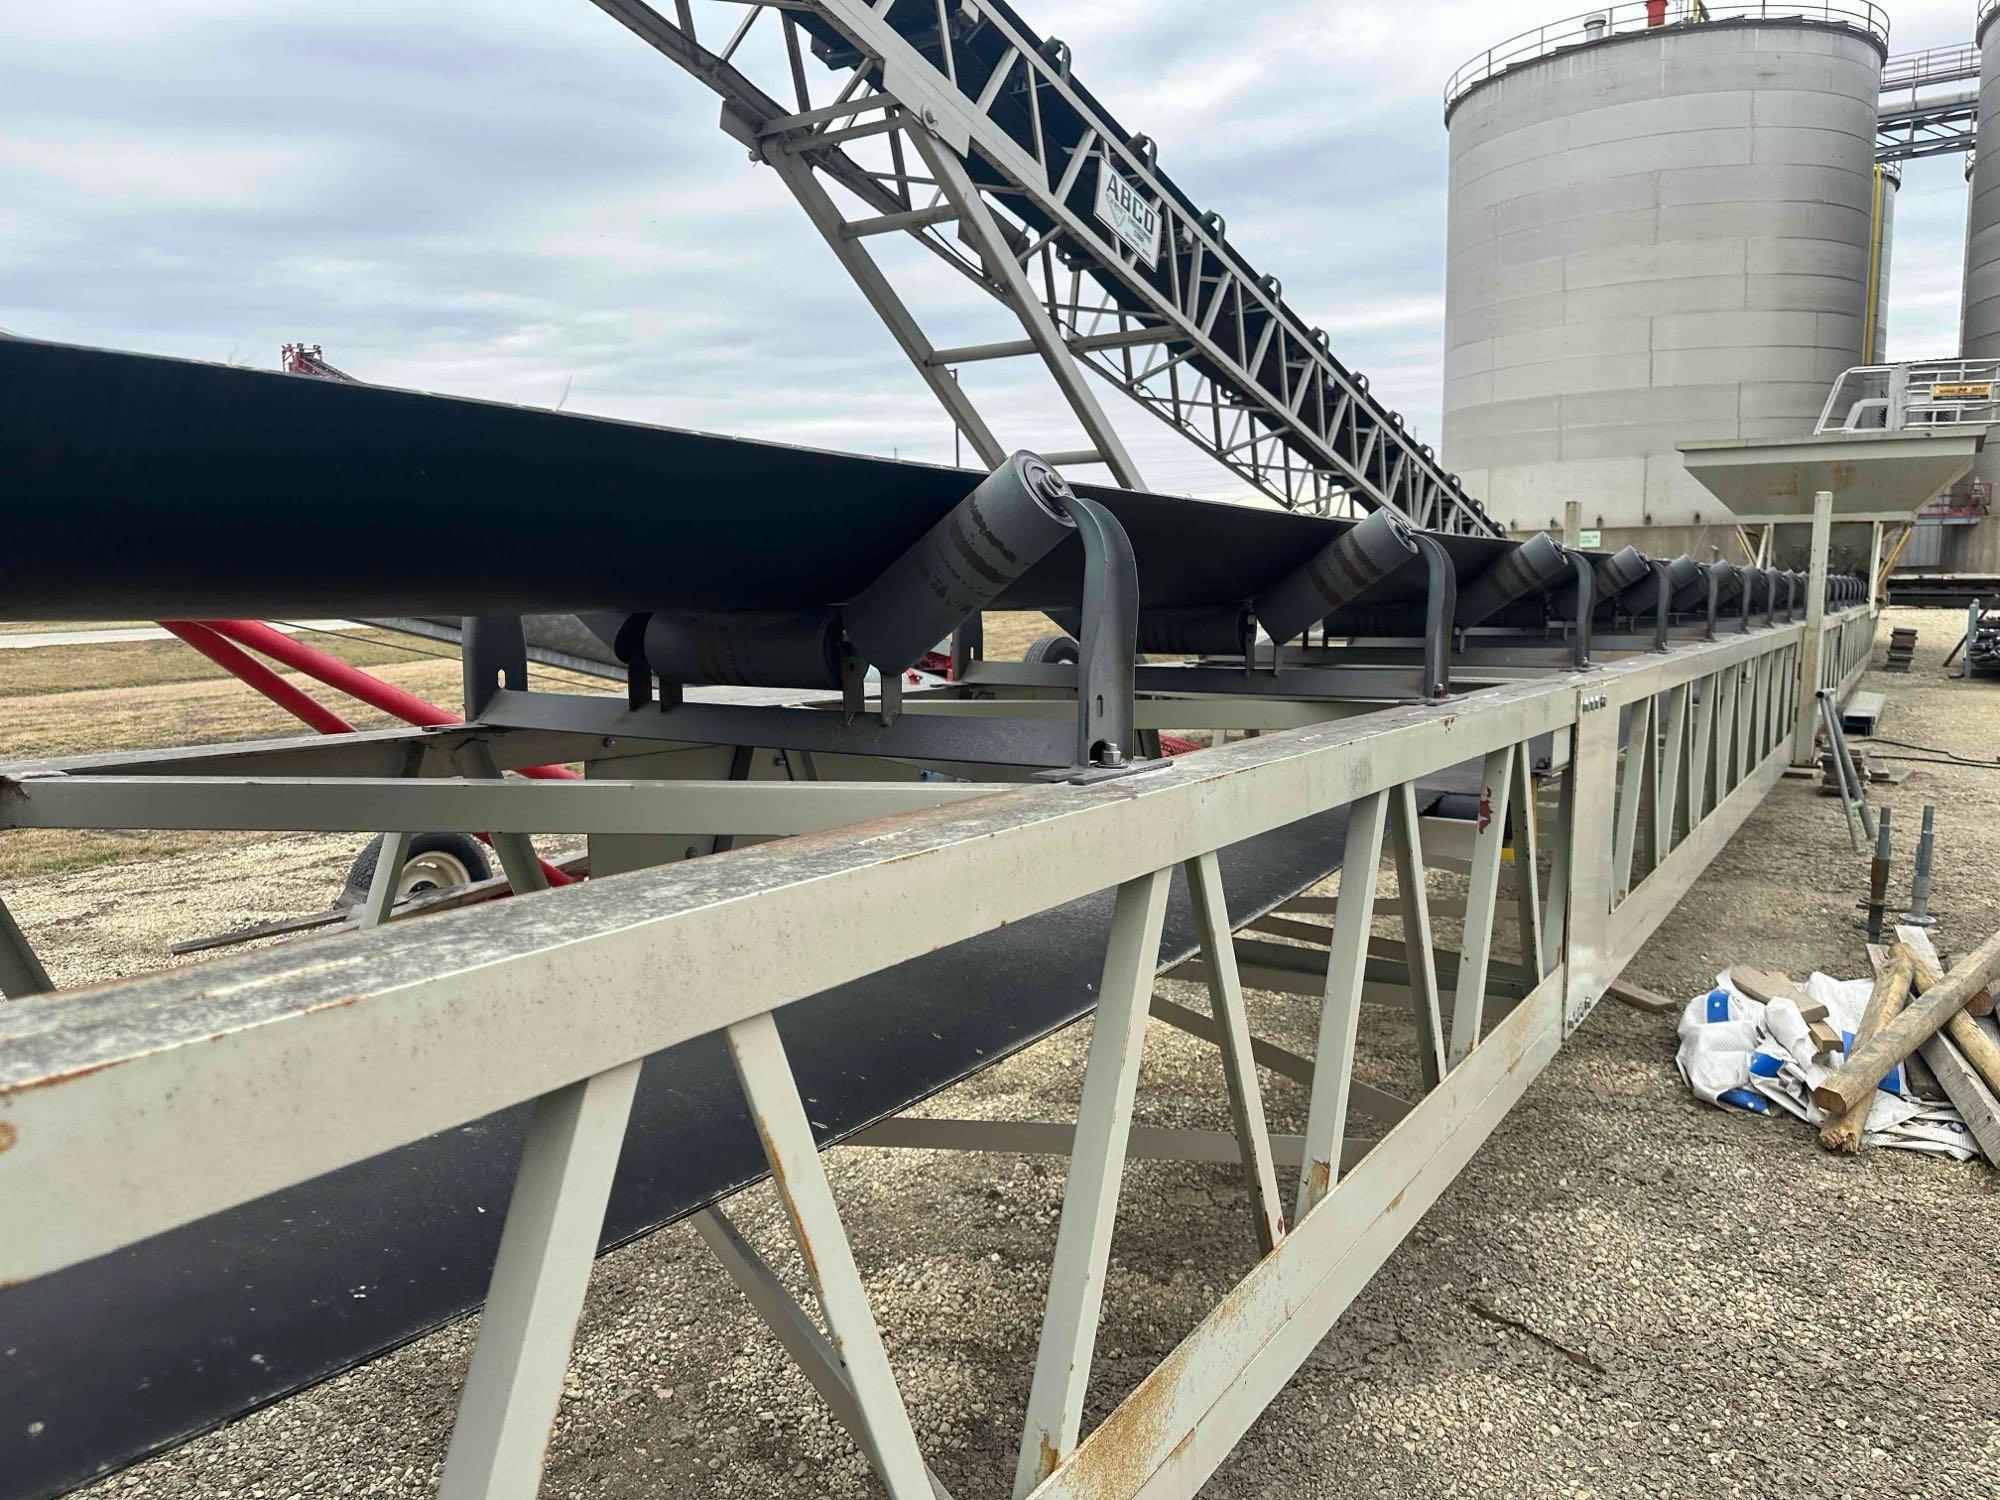 2016 ABCO 30inx100ft Field Stacking Conveyor with 10.3 CU YD Hopper